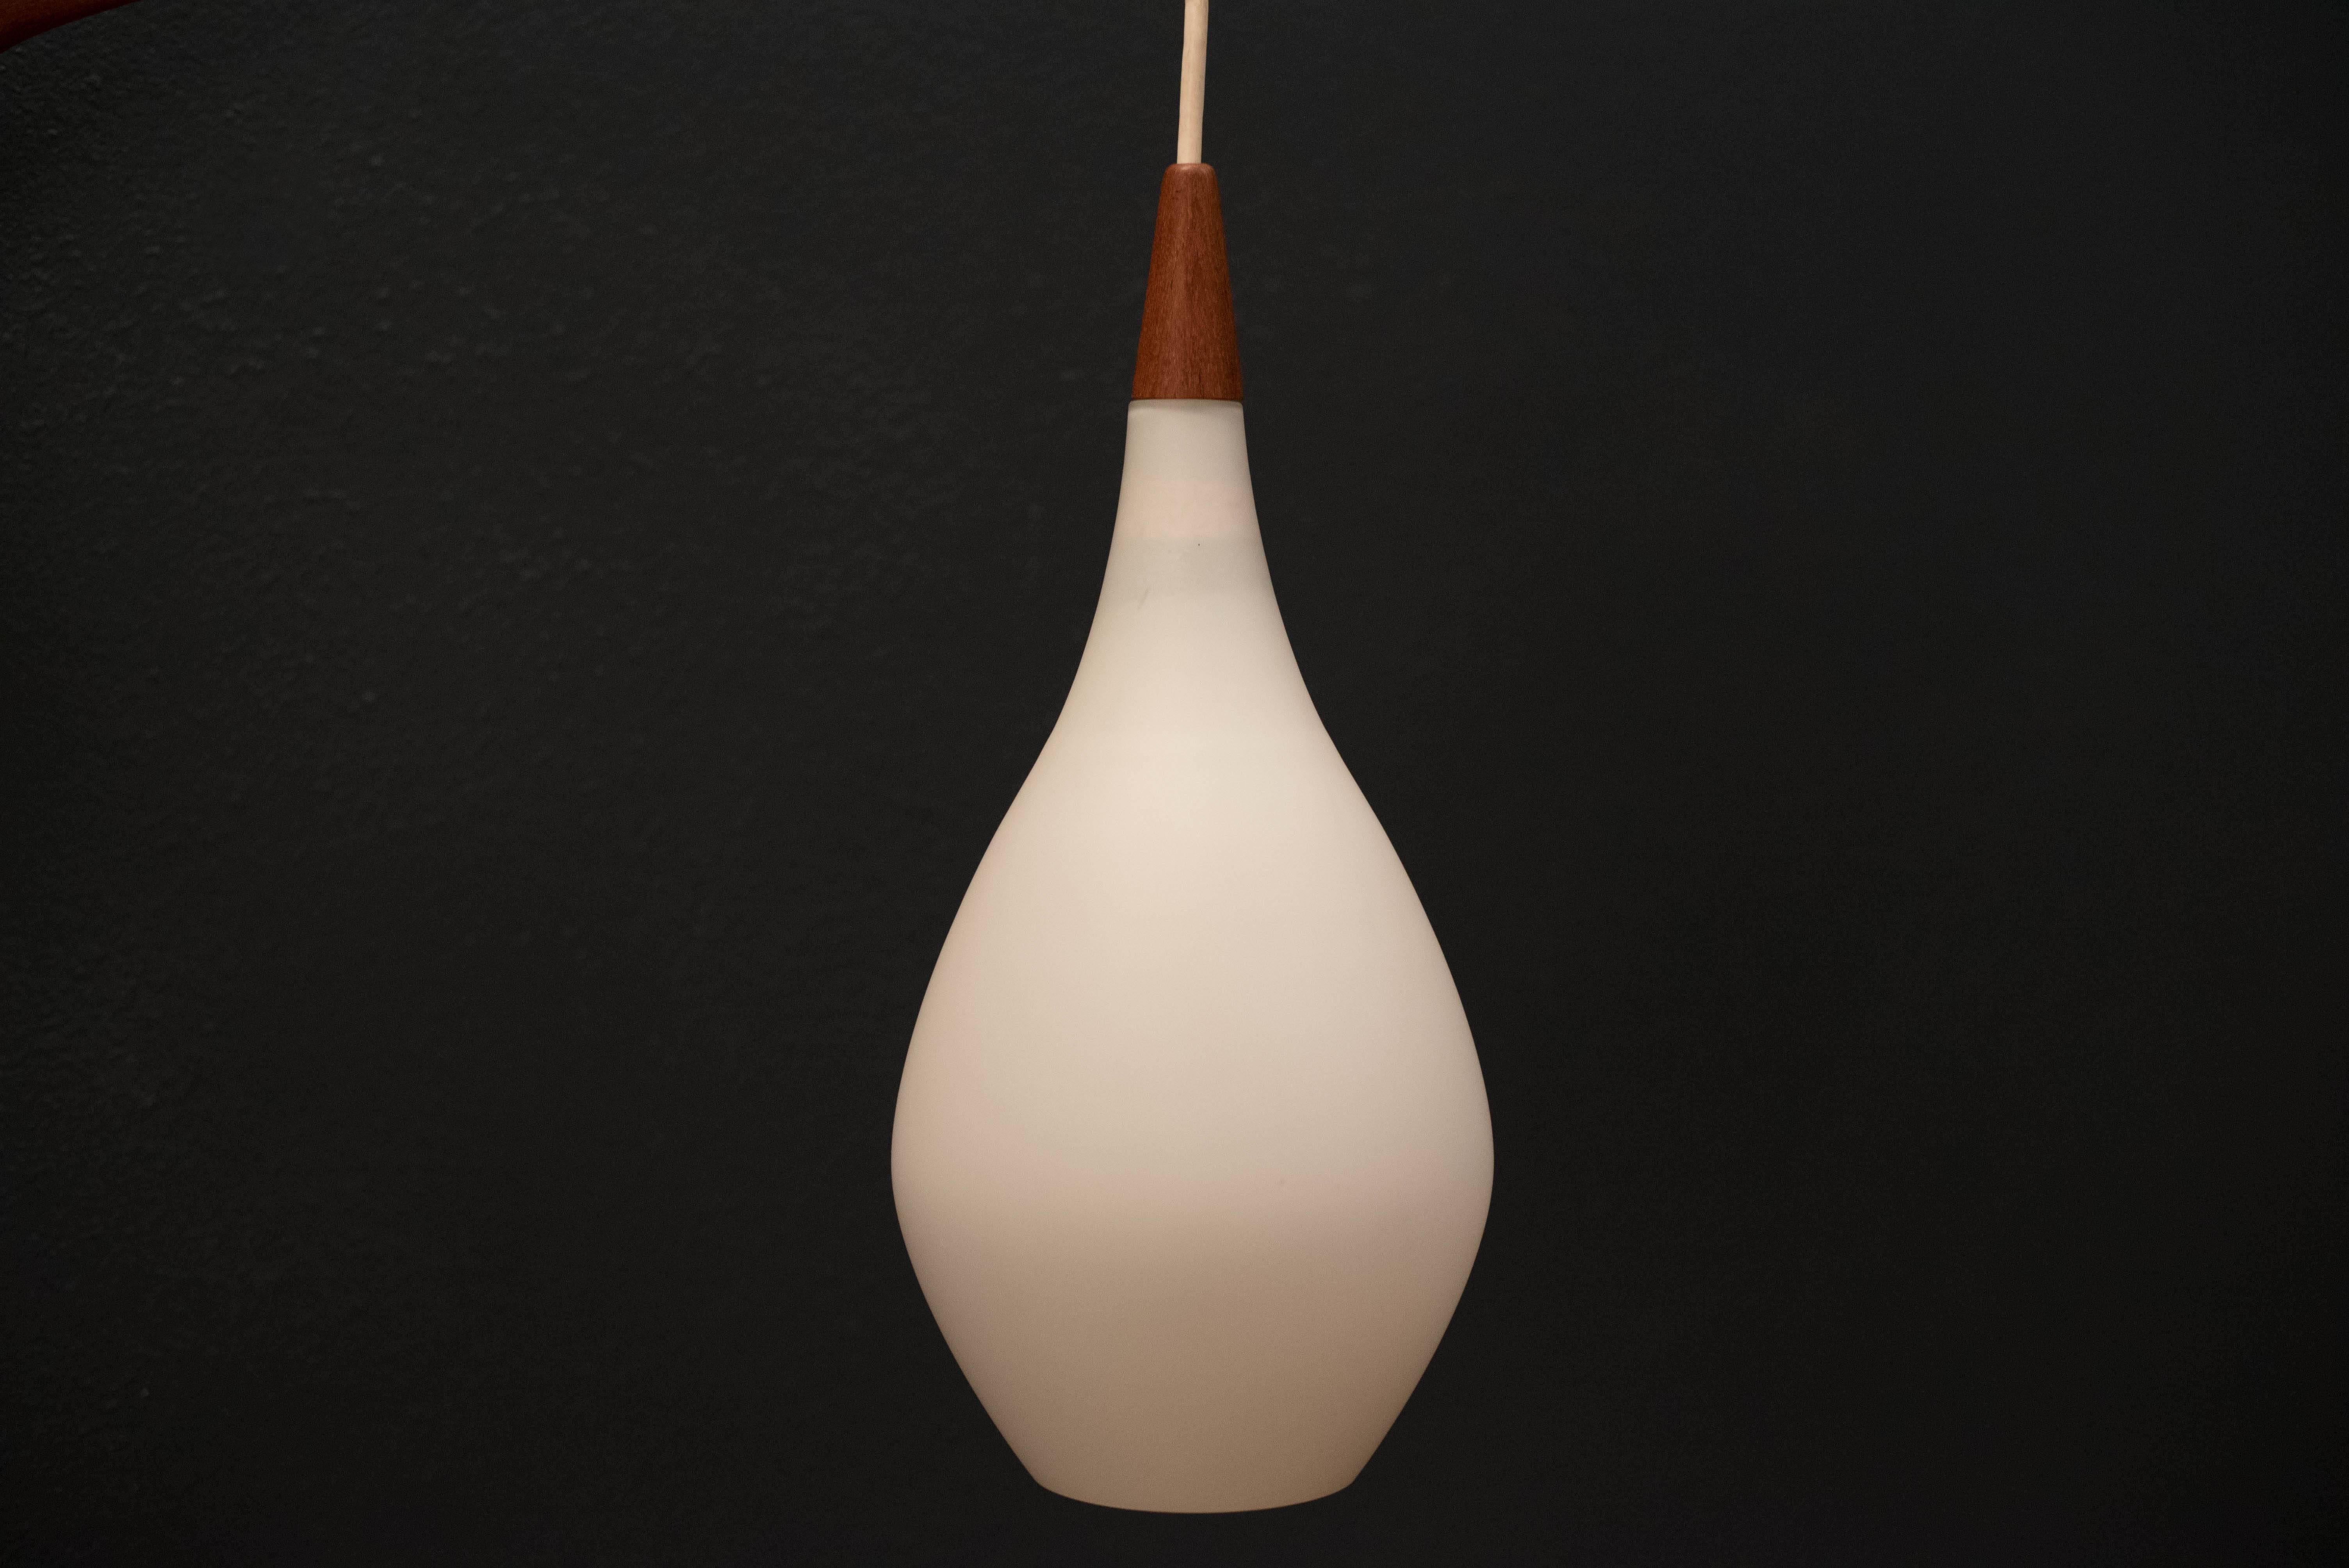 Mid-Century Modern hanging wall light by Holmegaard in teak. This piece displays a white frosted glass shade and includes a teak swing arm with adjustable cord. 

Swing arm: 23.25